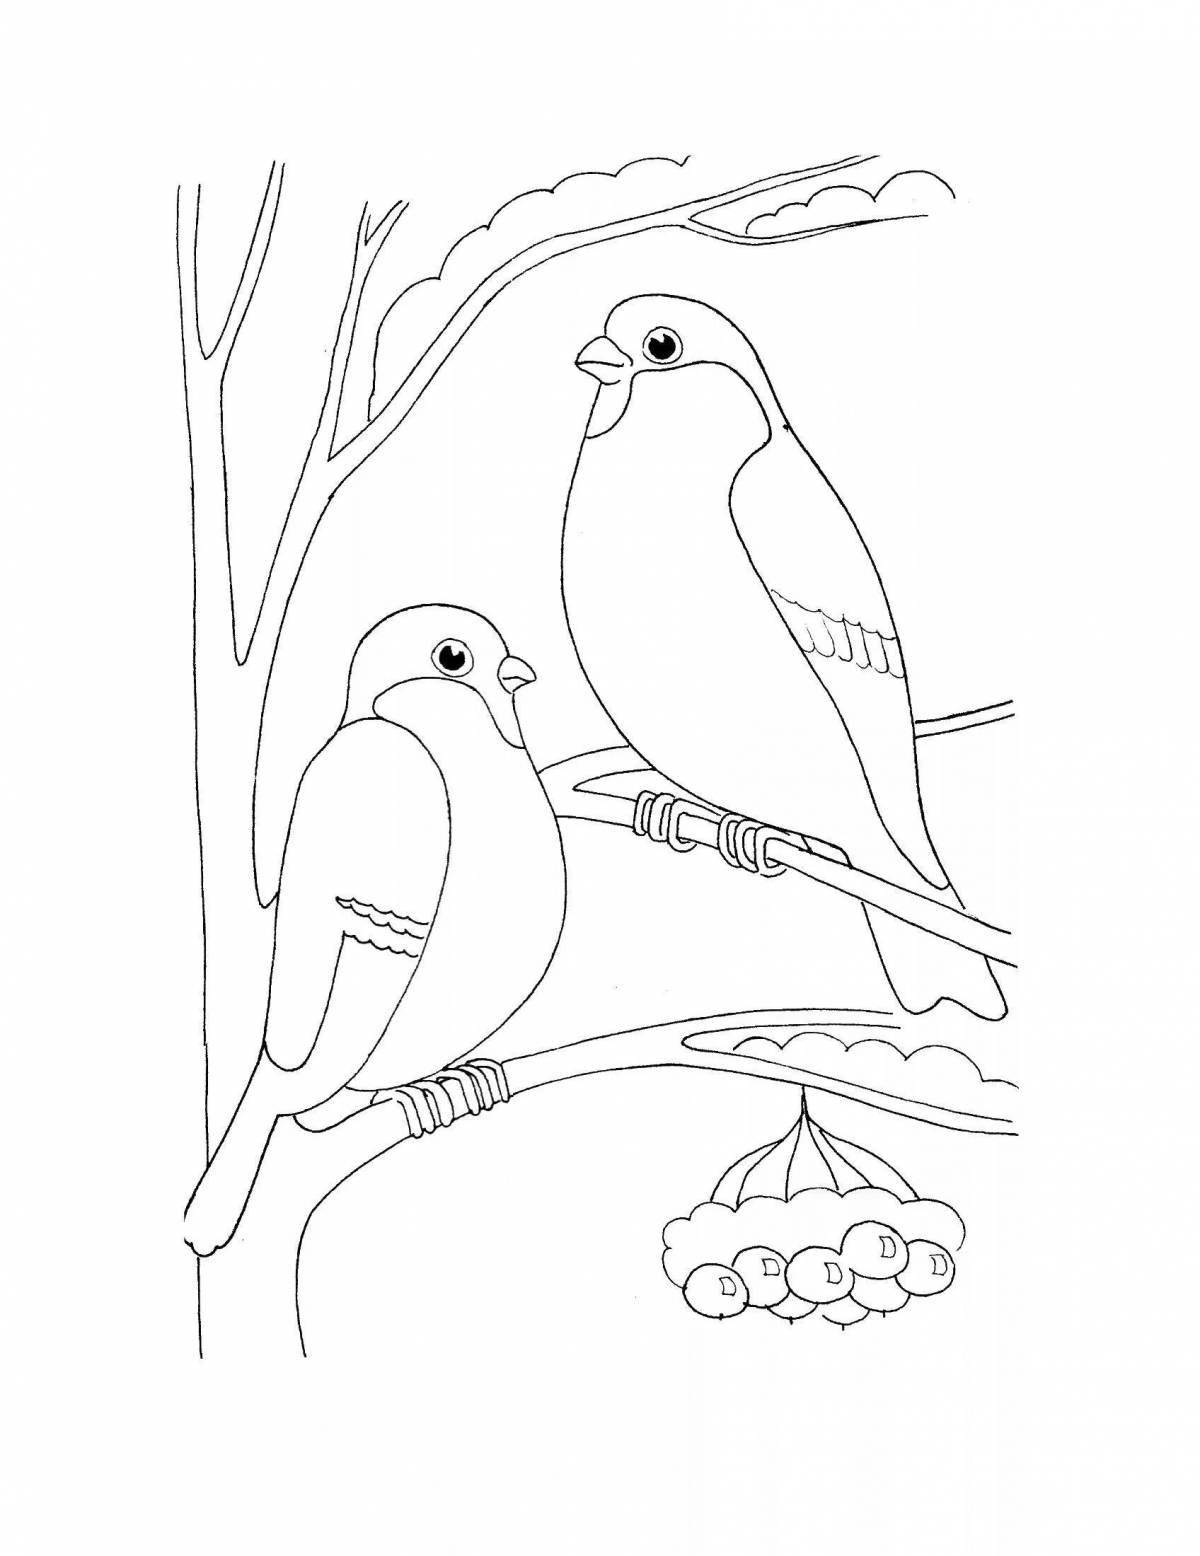 Coloring book happy titmouse day